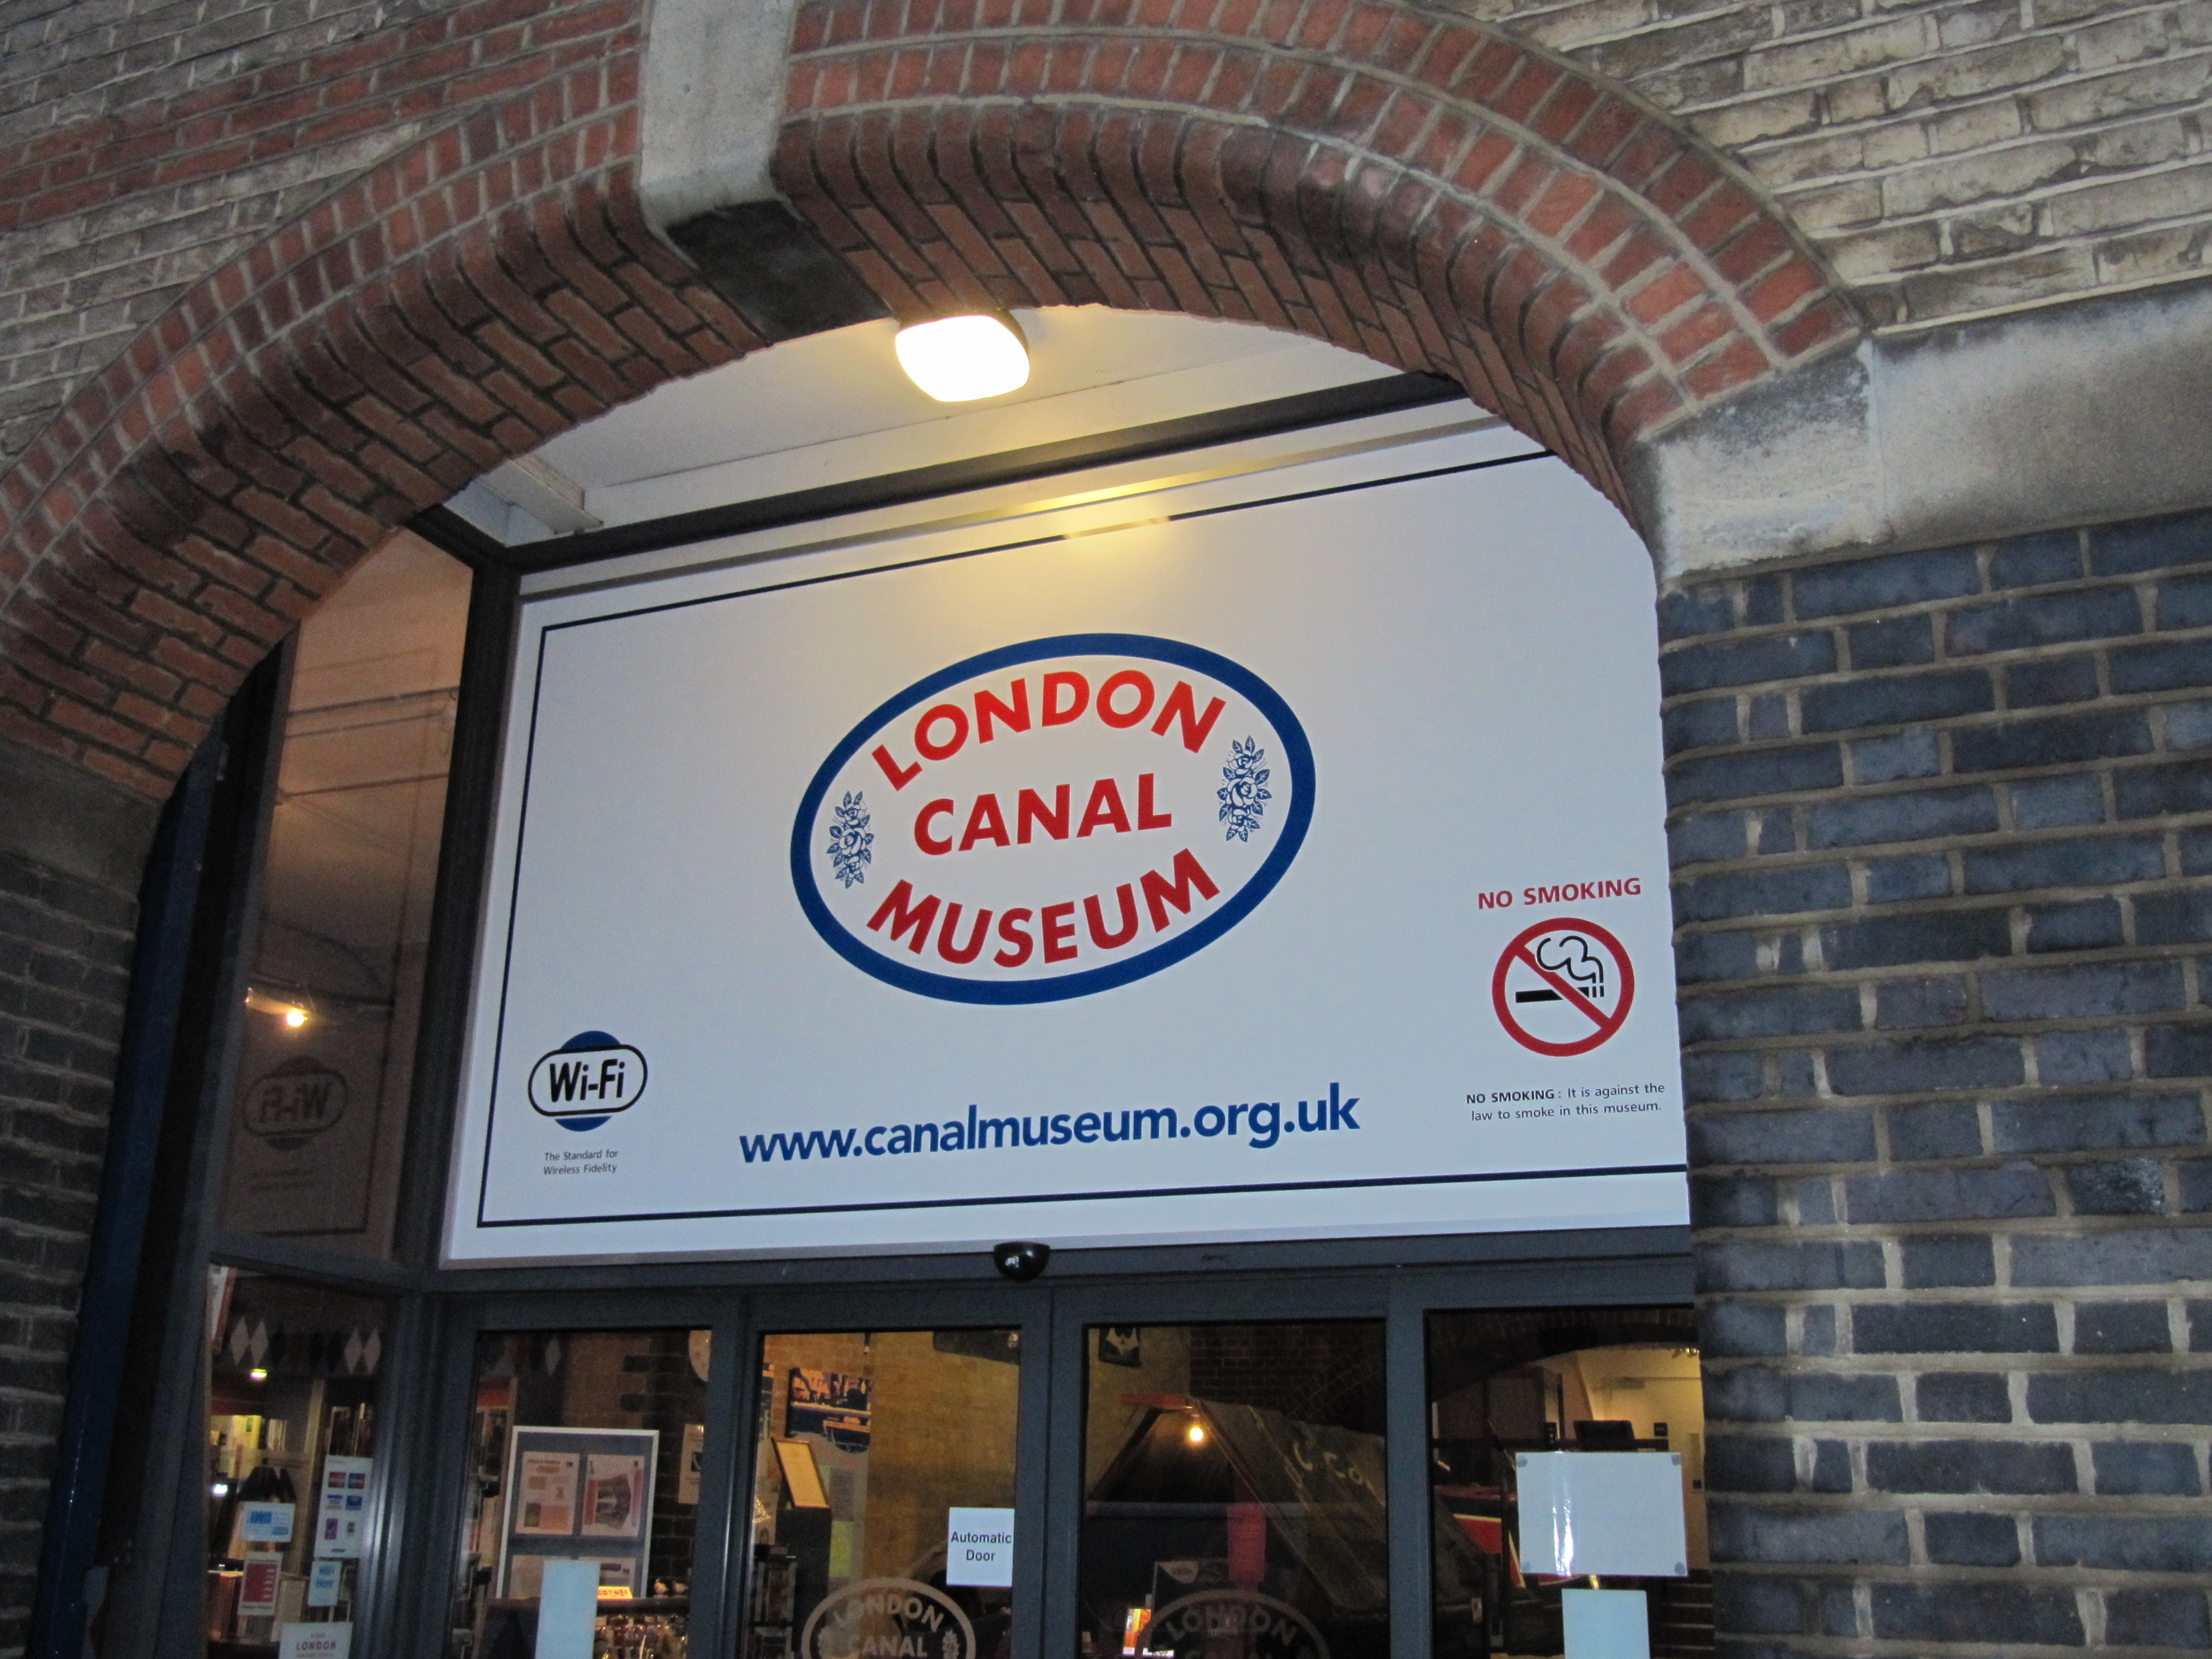 london canal museum